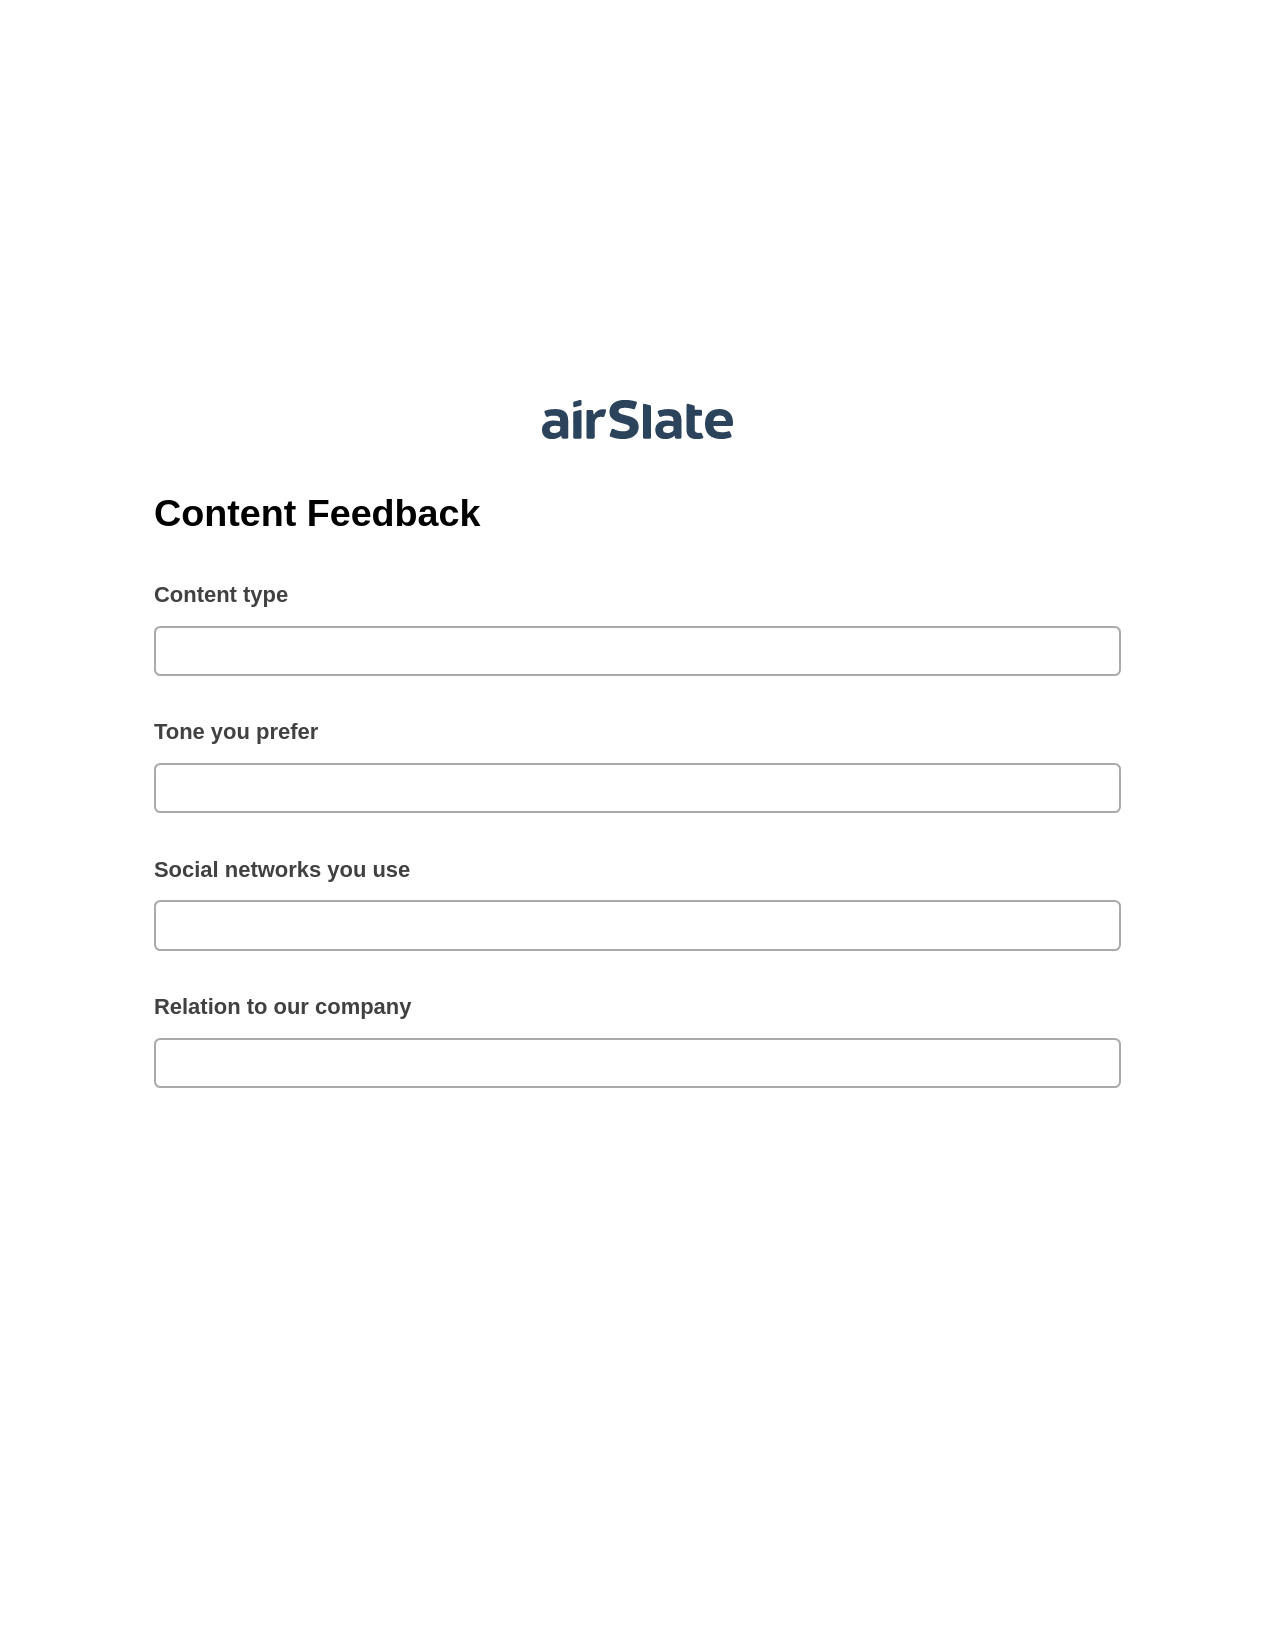 Content Feedback Pre-fill Slate from MS Dynamics 365 Records Bot, Jira Bot, Archive to SharePoint Folder Bot